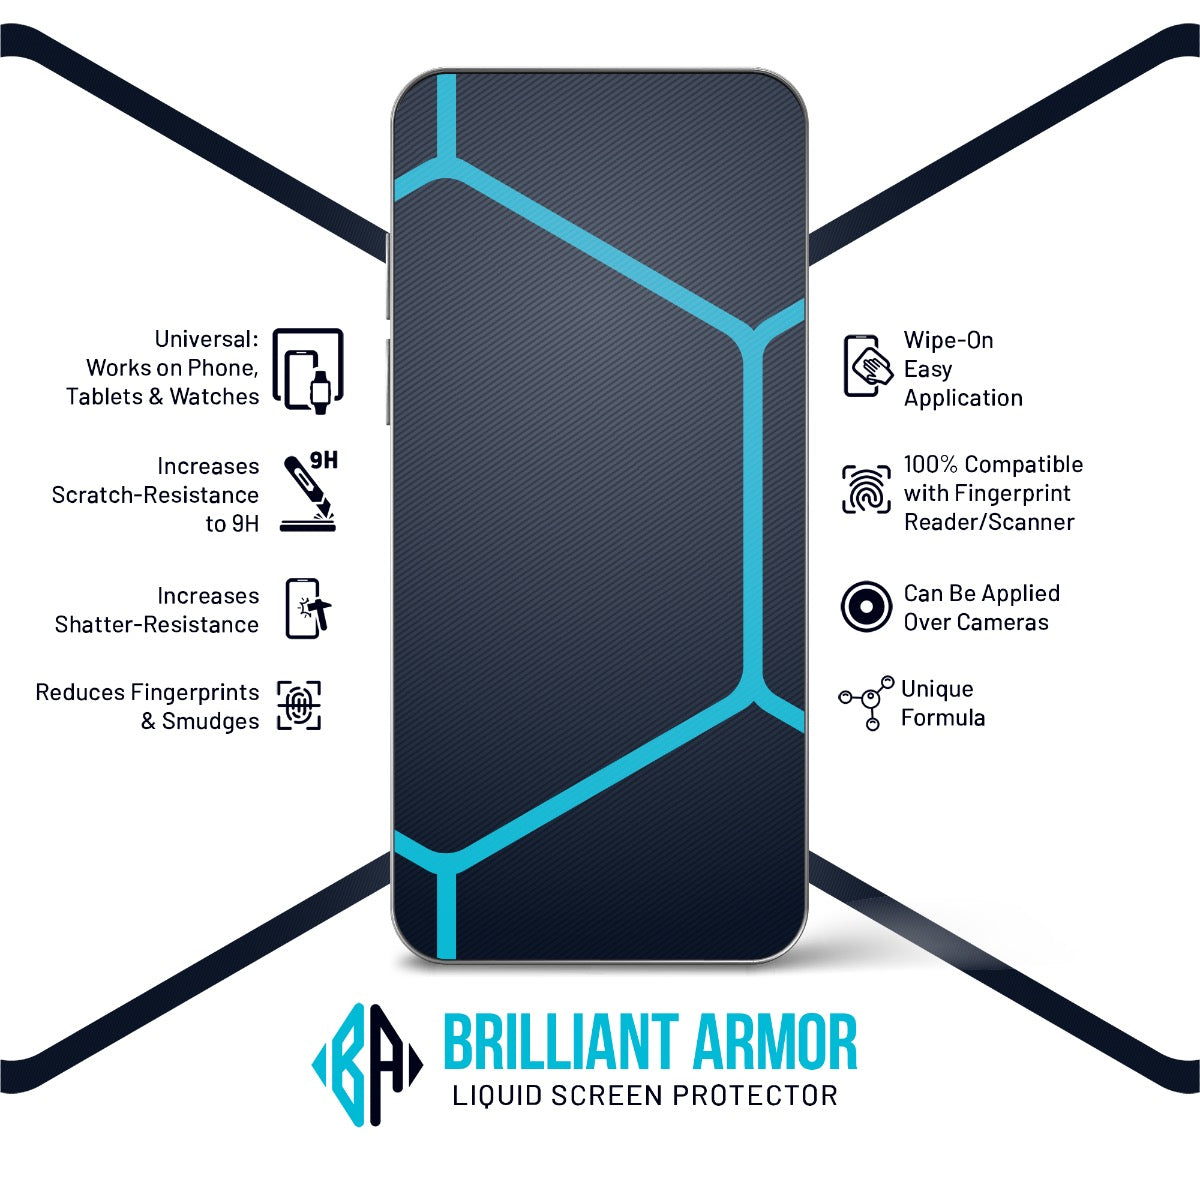 BRILLIANT ARMOR Liquid Screen Protector for All Phones Tablets and Smart Watches